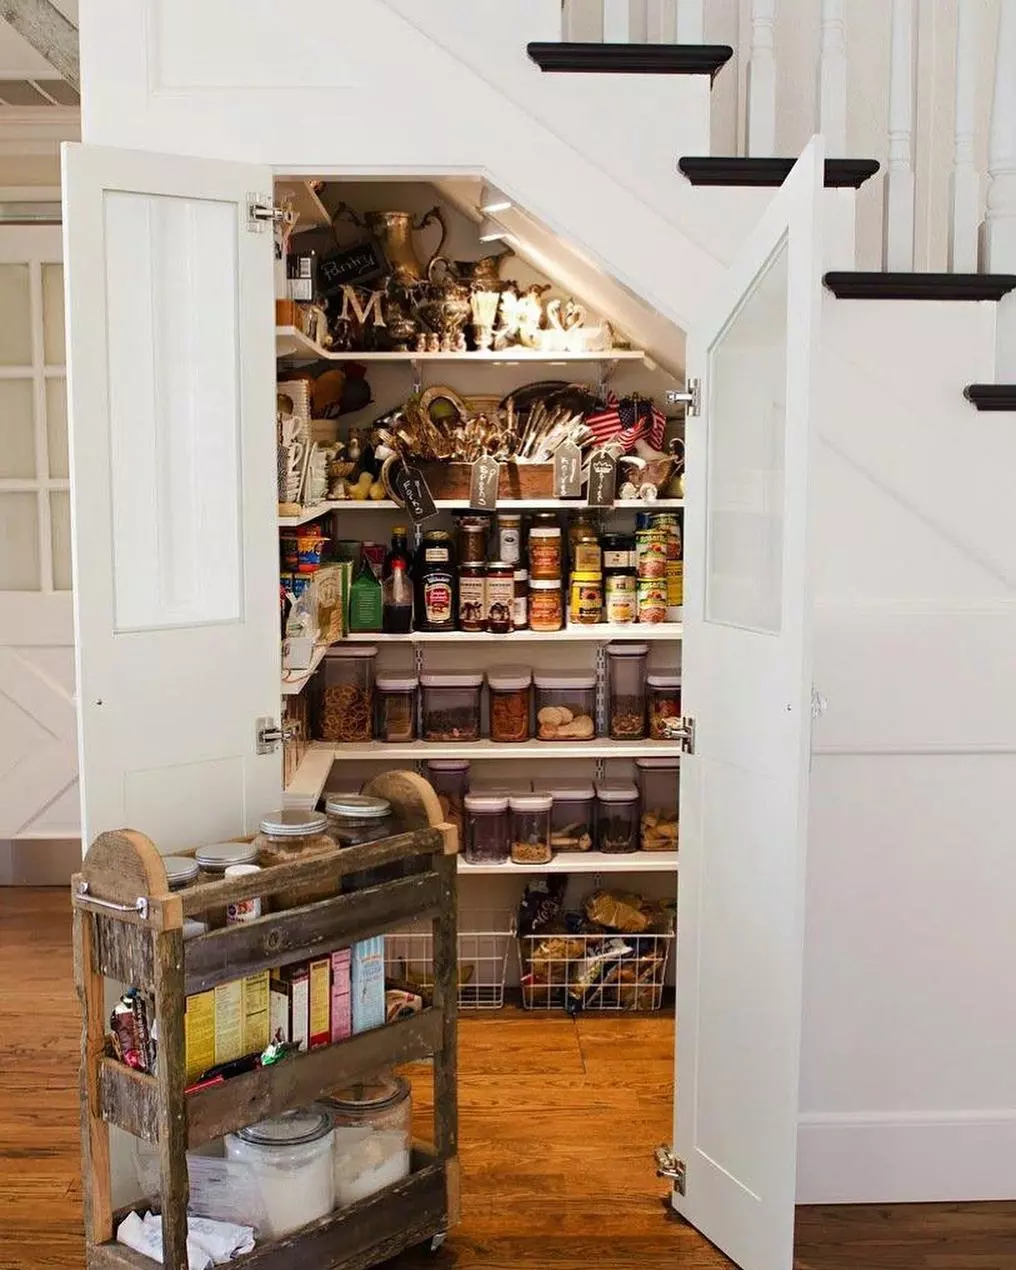 https://www.extraspace.com/blog/wp-content/uploads/2018/04/creative-under-stairs-storage-ideas-more-pantry-space.jpg.webp